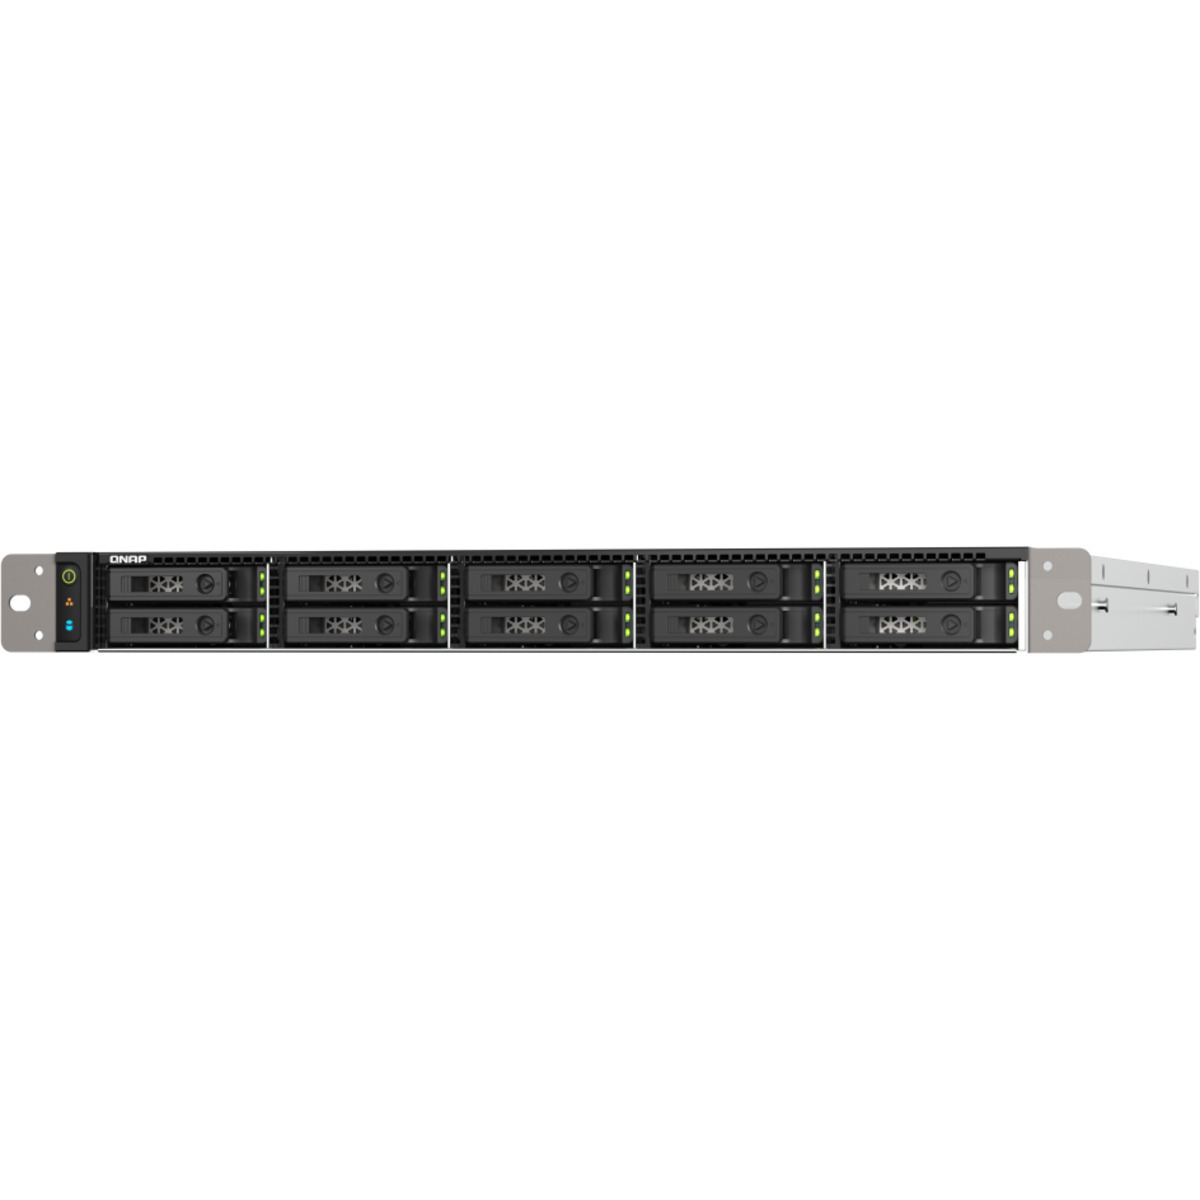 QNAP TS-h1090FU-7302P 2.5tb 10-Bay RackMount Large Business / Enterprise NAS - Network Attached Storage Device 10x250gb Western Digital Red SN700 WDS250G1R0C  3100/1600MB/s M.2 2280 NVMe SSD NAS Class Drives Installed - Burn-In Tested TS-h1090FU-7302P